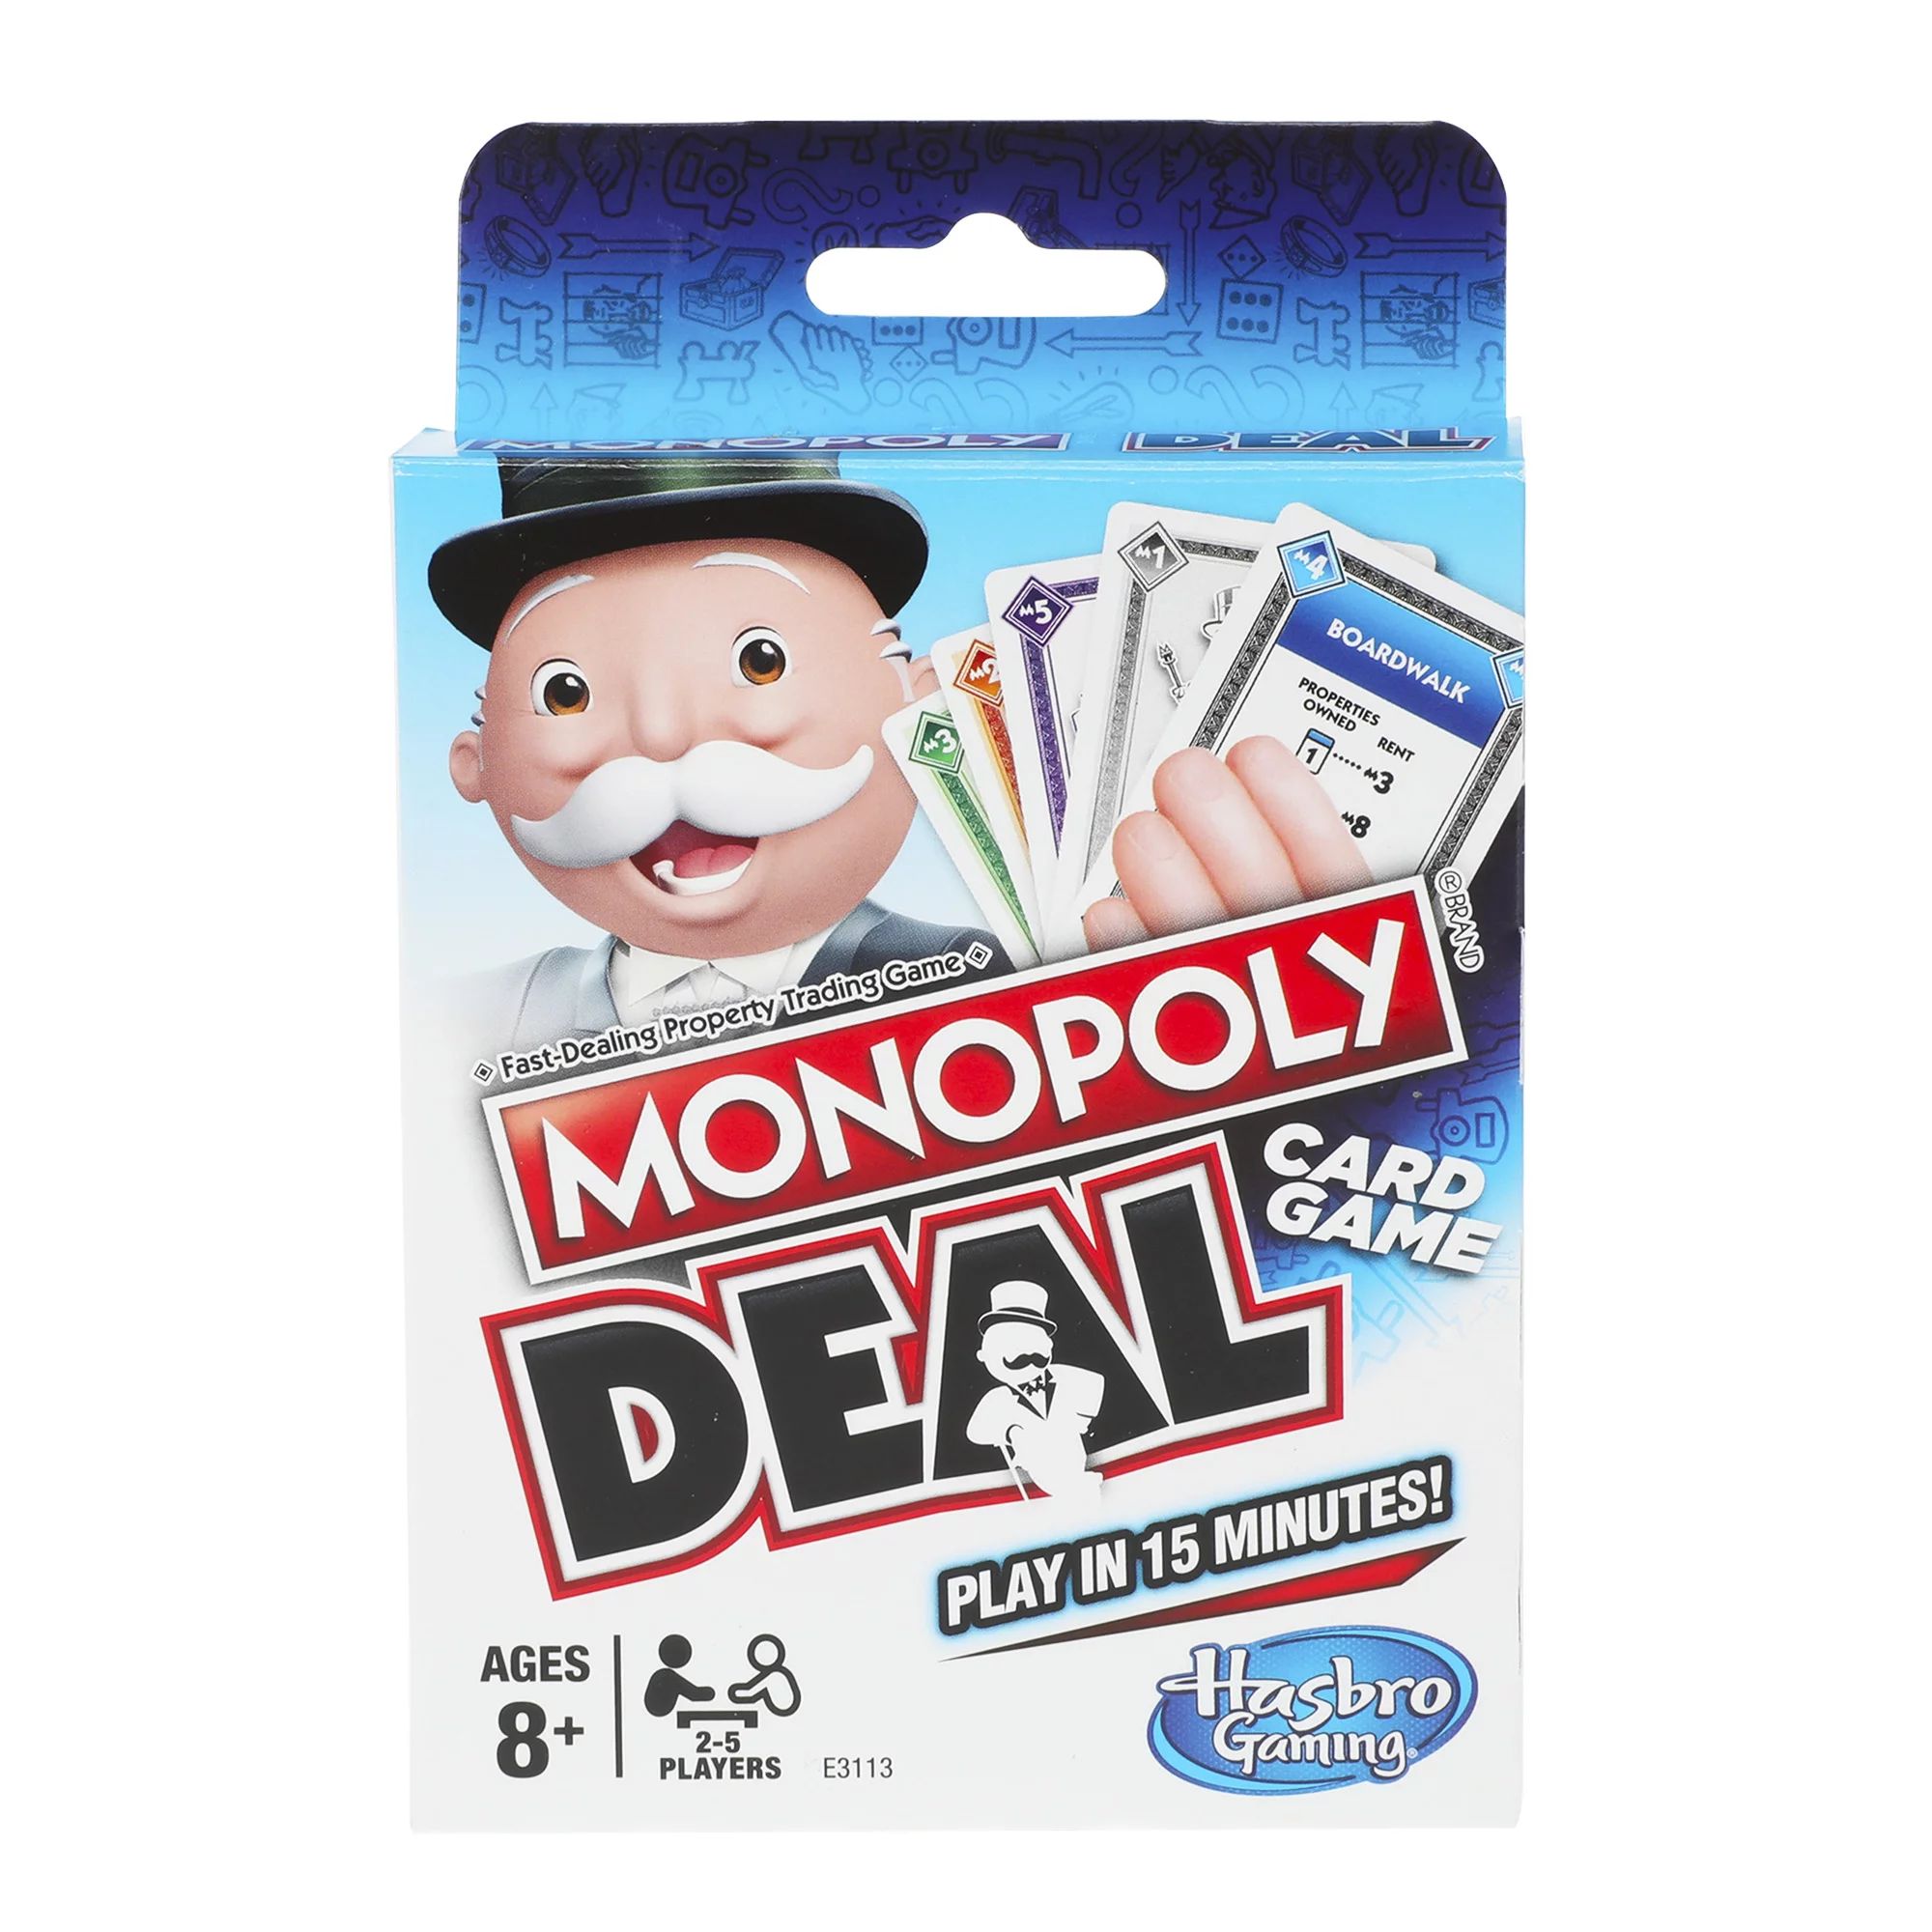 Monopoly Deal Card Game, for 2 to 5 Players, Card Game for Kids Ages 8 and Up | Walmart (US)